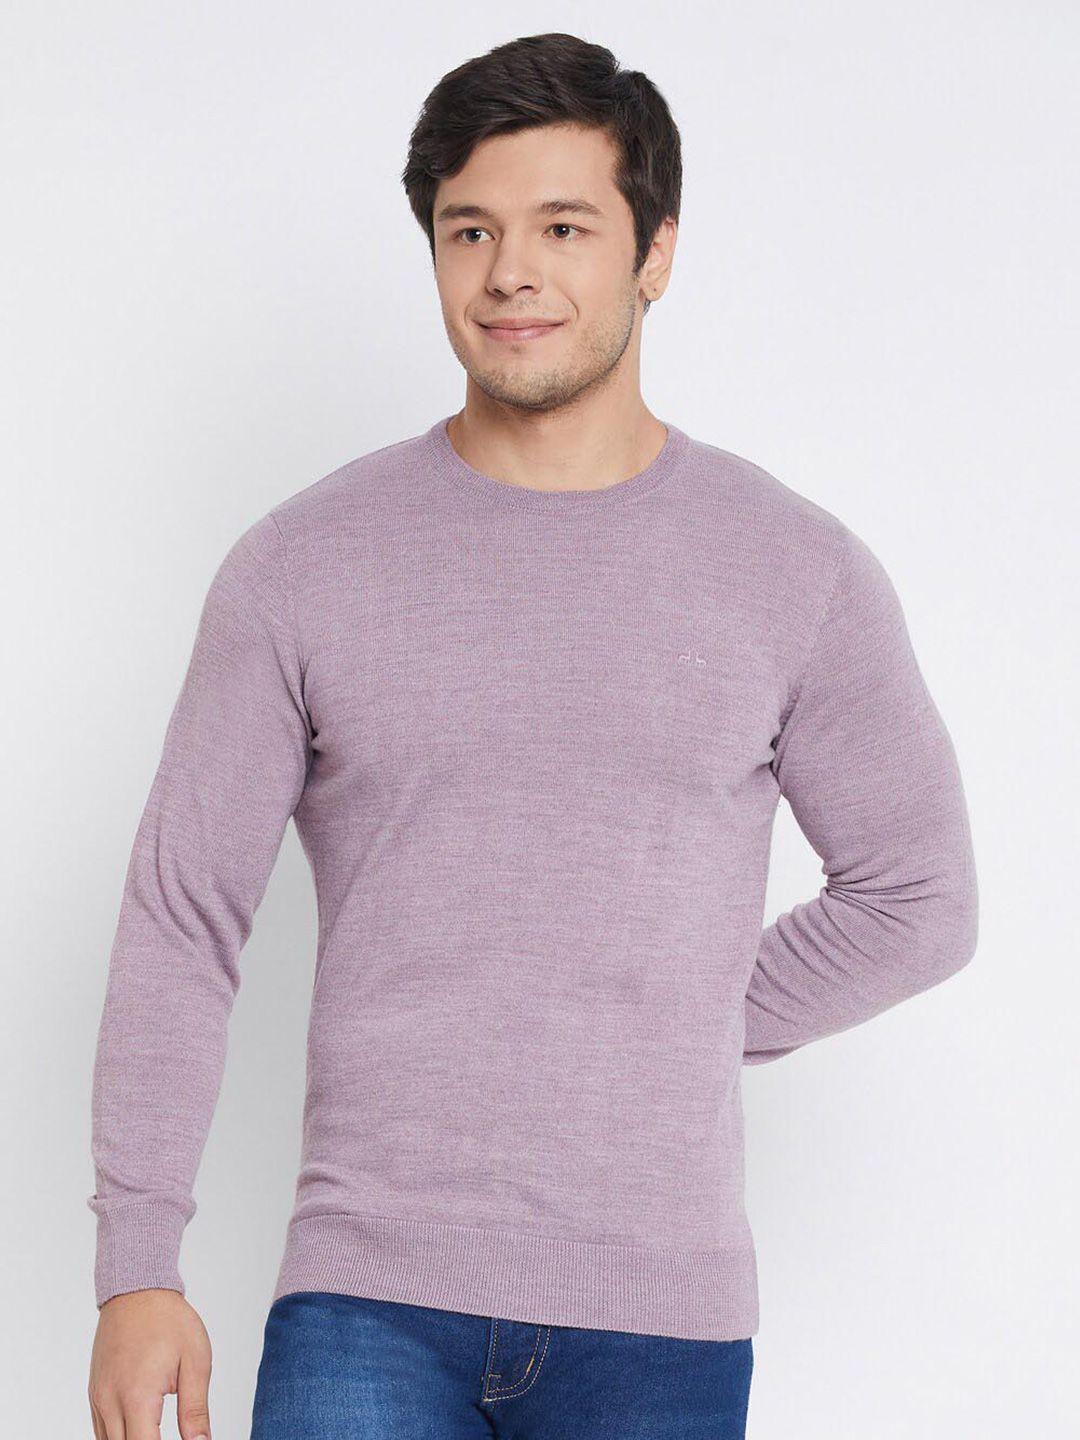 98 degree north ribbed woollen pullover